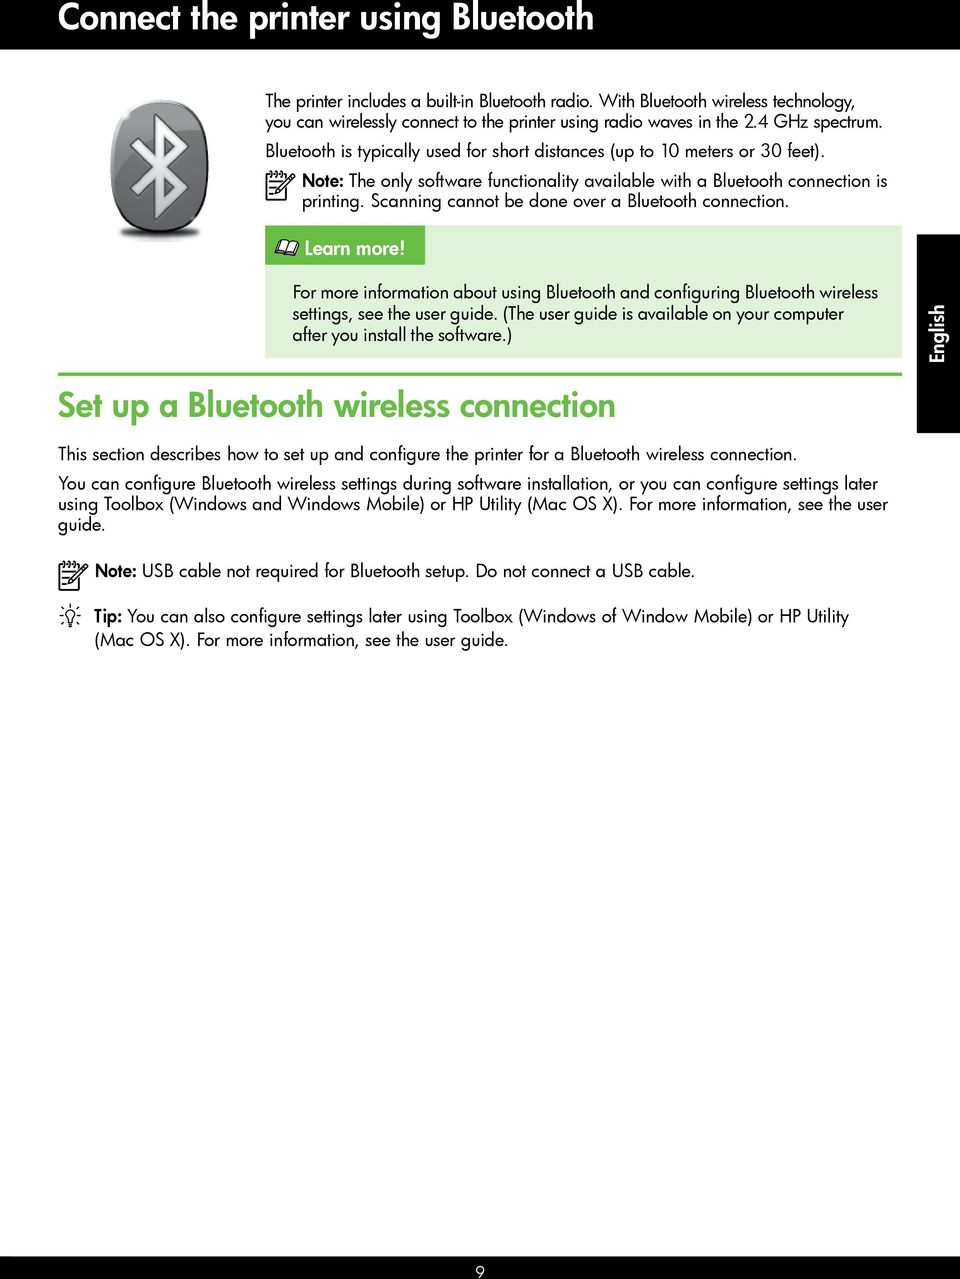 Scanning cannot be done over a Bluetooth connection. Learn more! For more information about using Bluetooth and configuring Bluetooth wireless settings, see the user guide.